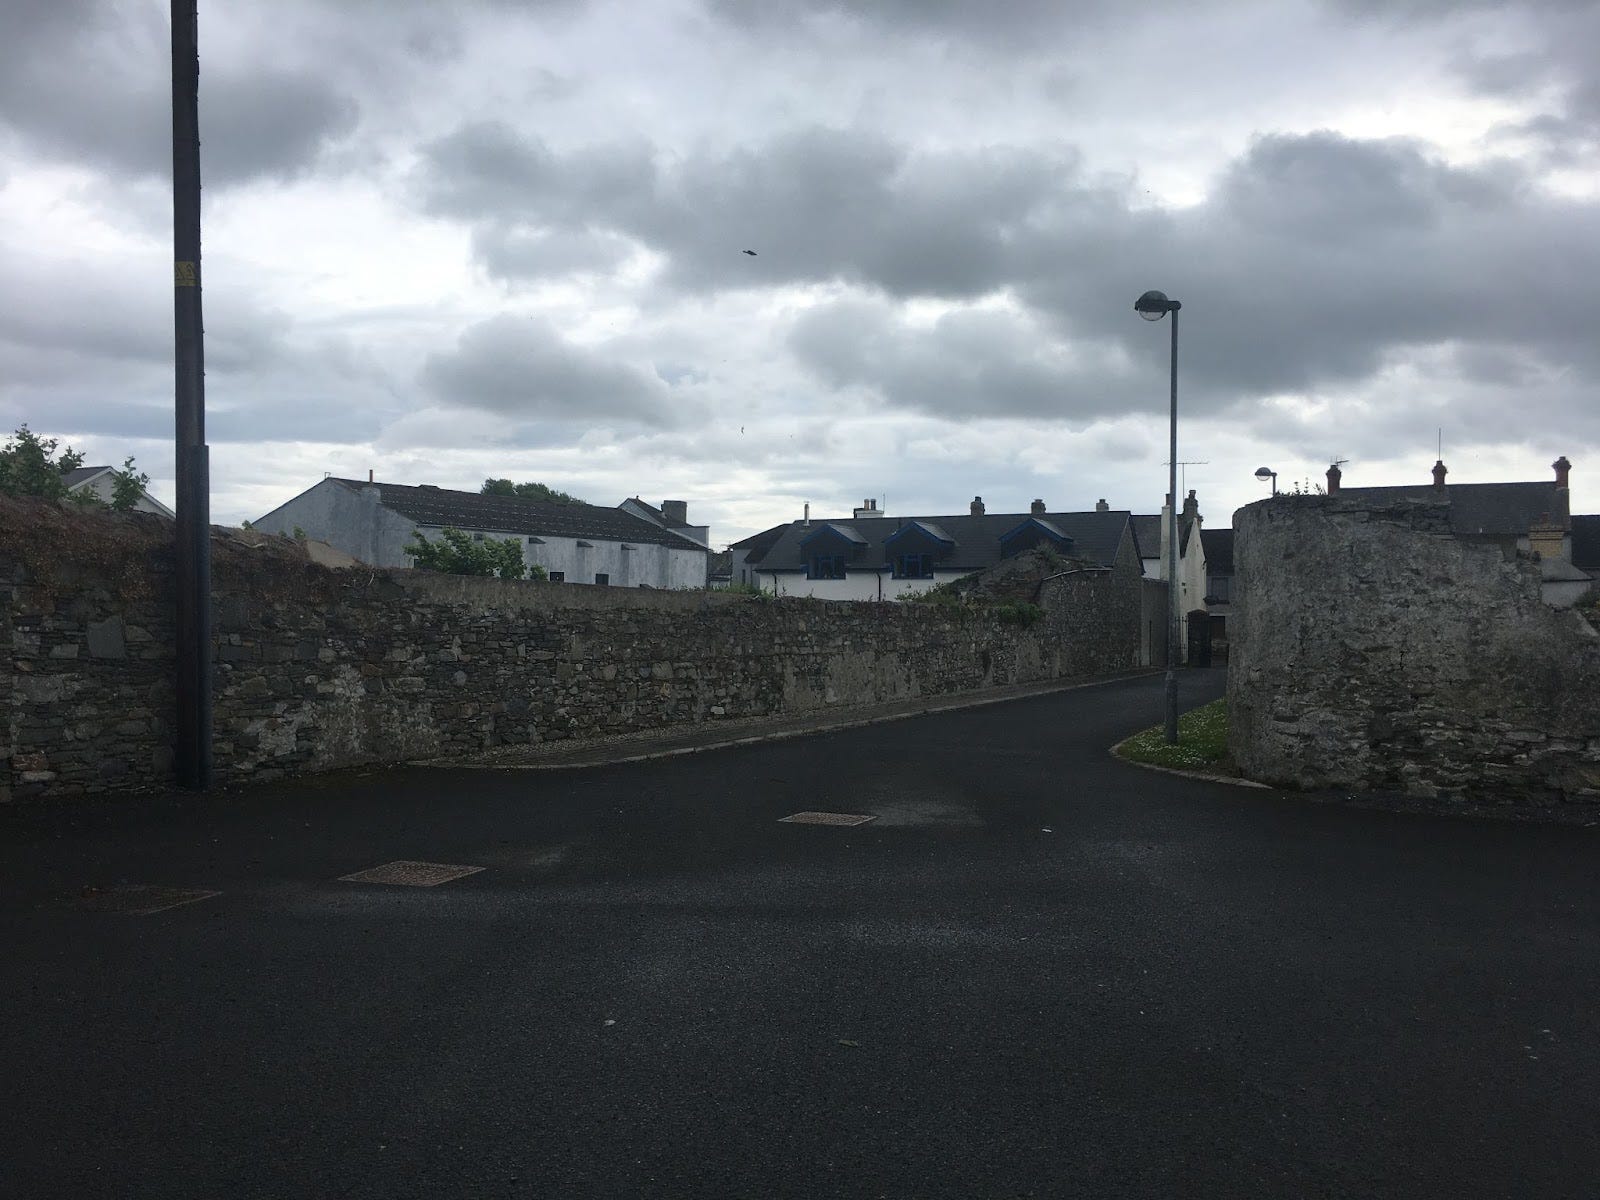 Intersection of two streets, each surrounded by tall rock walls.Portaferry, Ireland. May 2019. Photograph by the author.